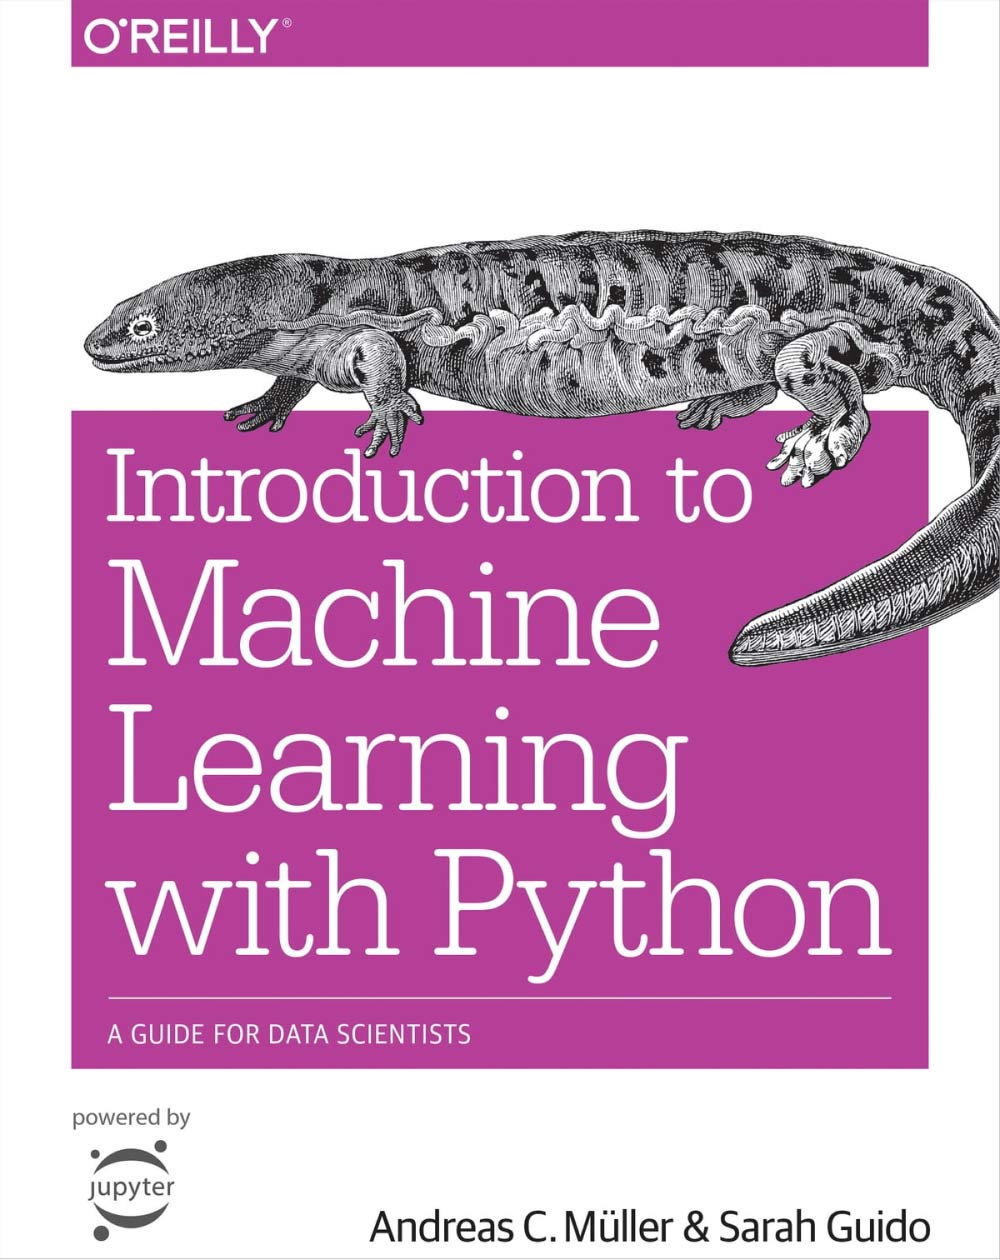 Introduction to Machine Learning with Python - Andreas C.Muller, Sarah Guido